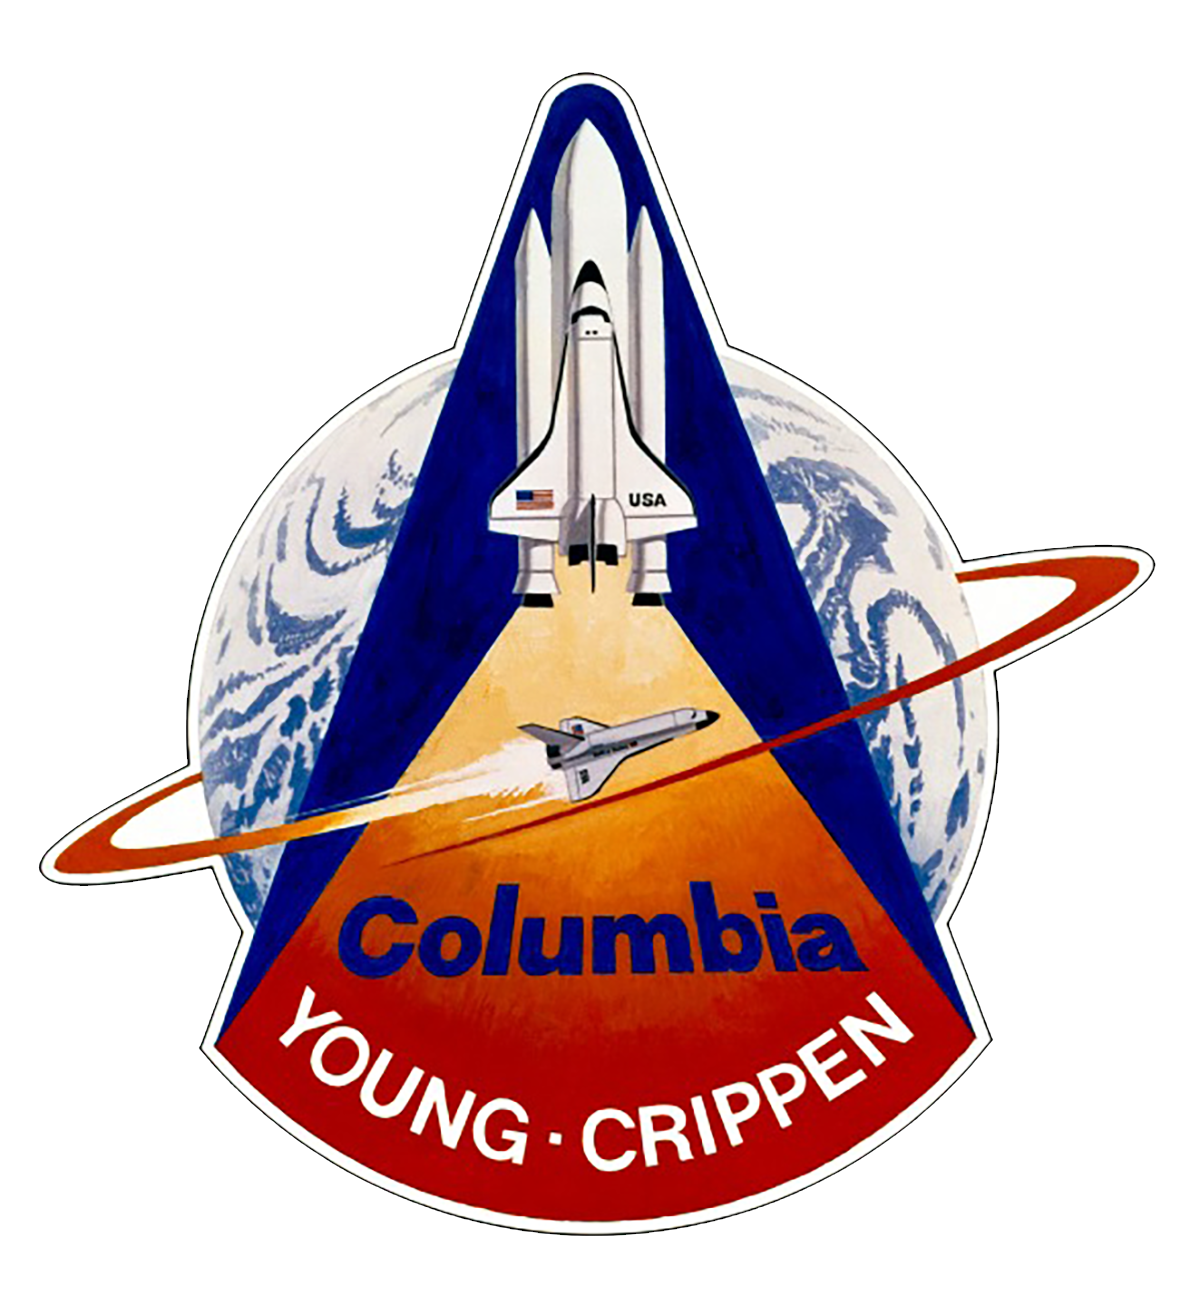 STS-1 (Columbia)